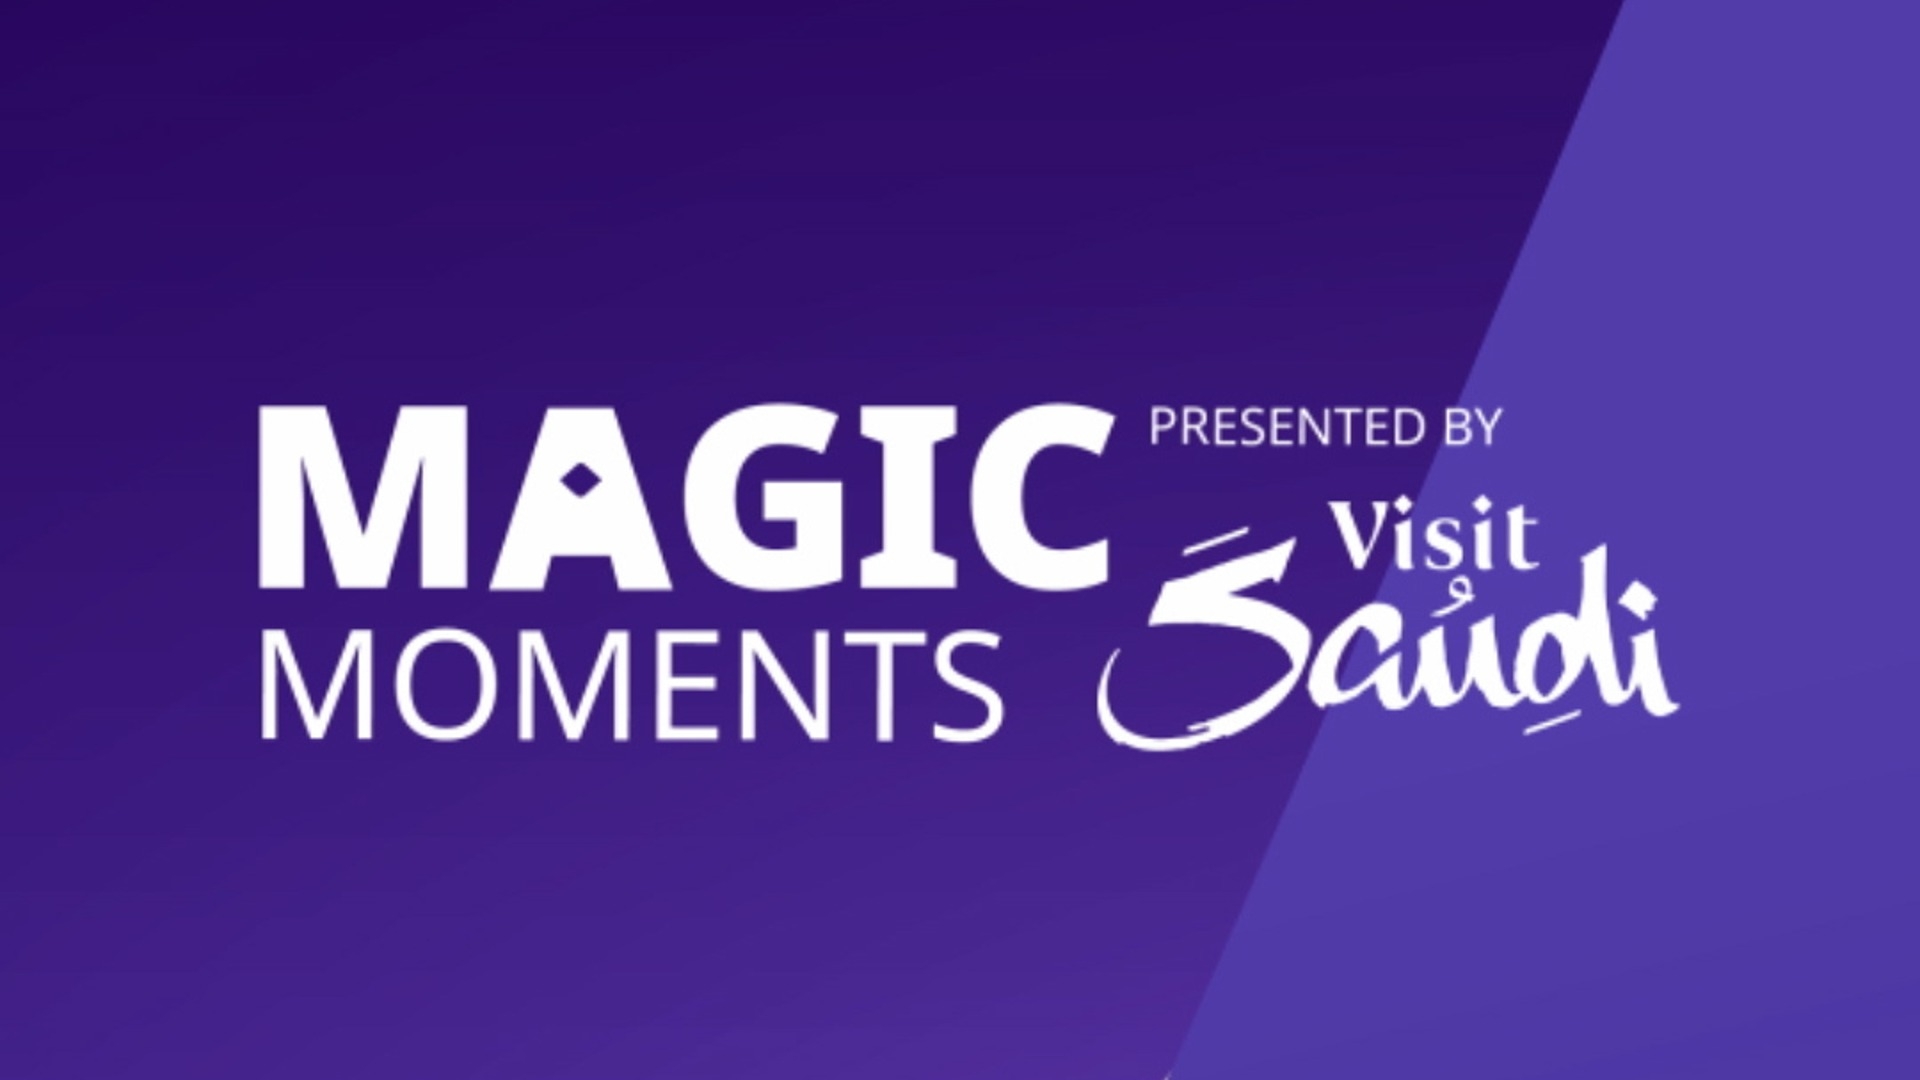 What Are Your Life's Magic Moments?